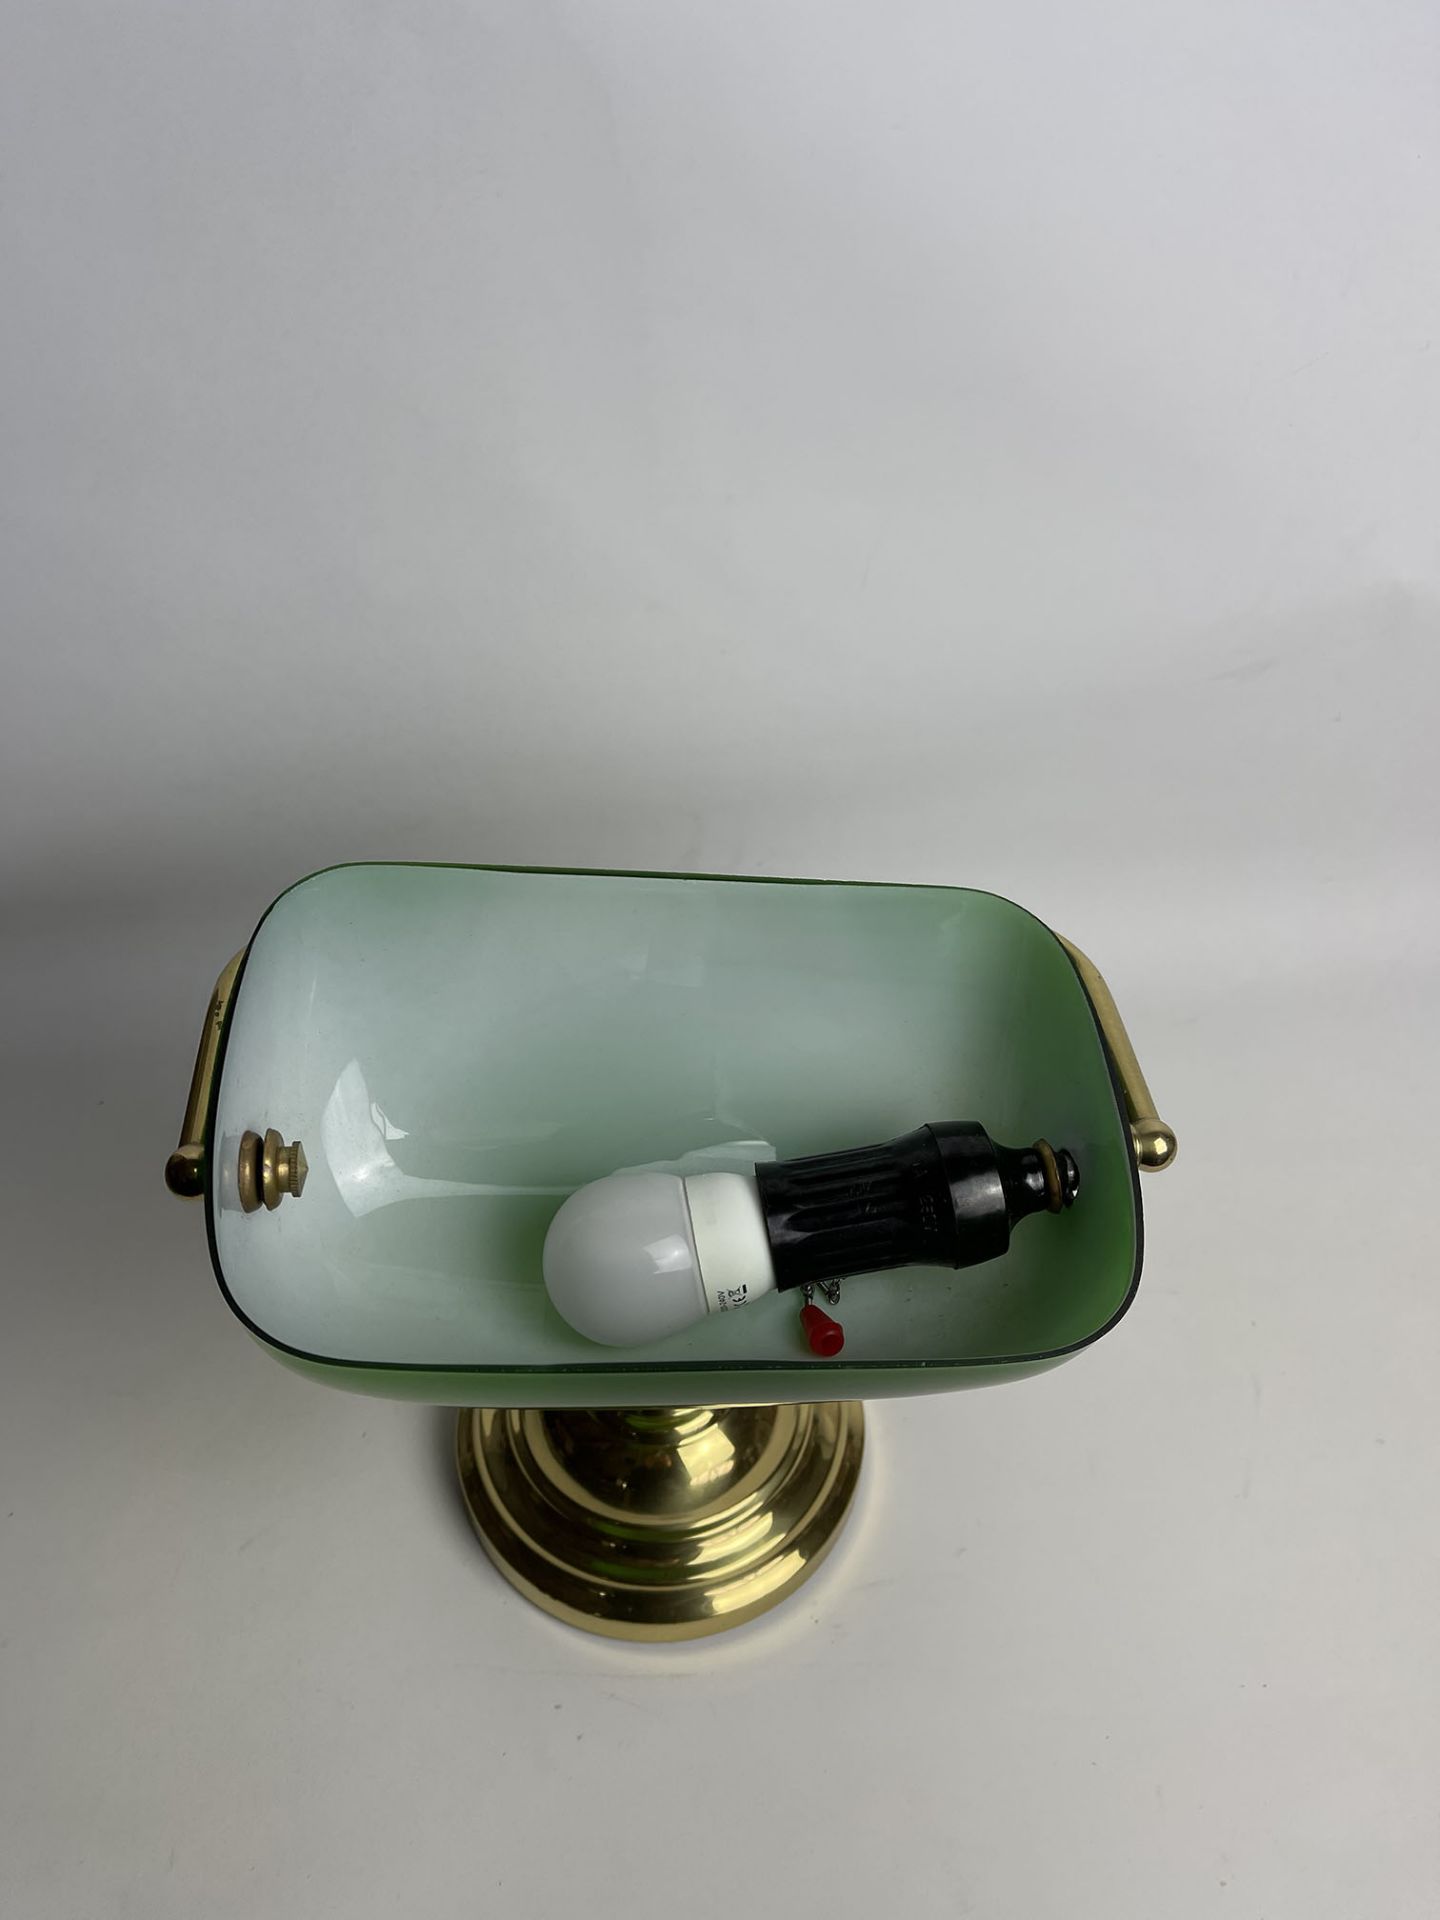 Vintage American Desk Lamp with Green Lamp Shade - Image 9 of 9